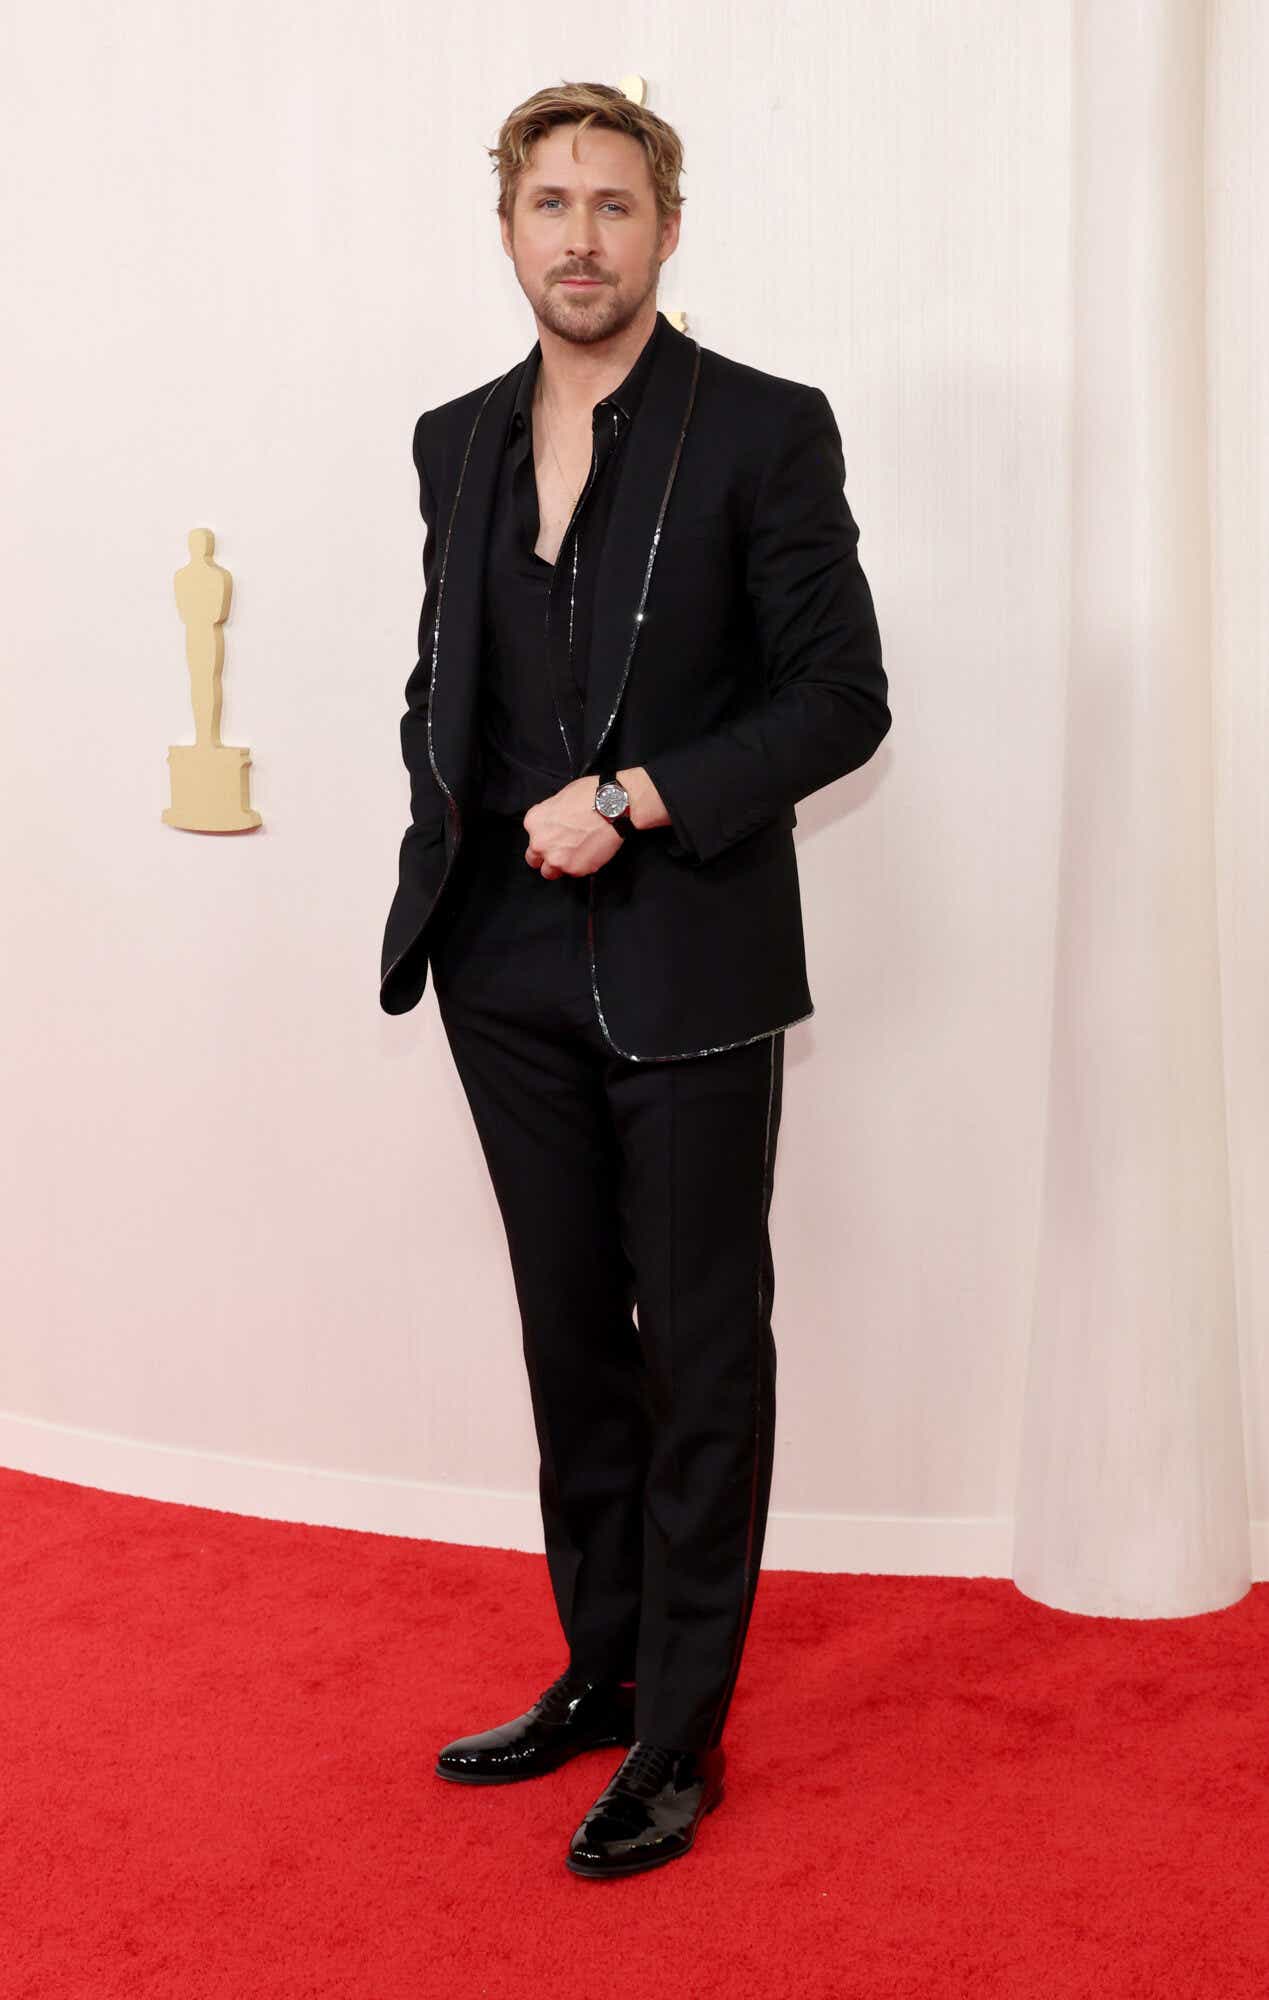 Ryan Gosling wears a black suit with a sequined trim to the Oscars.